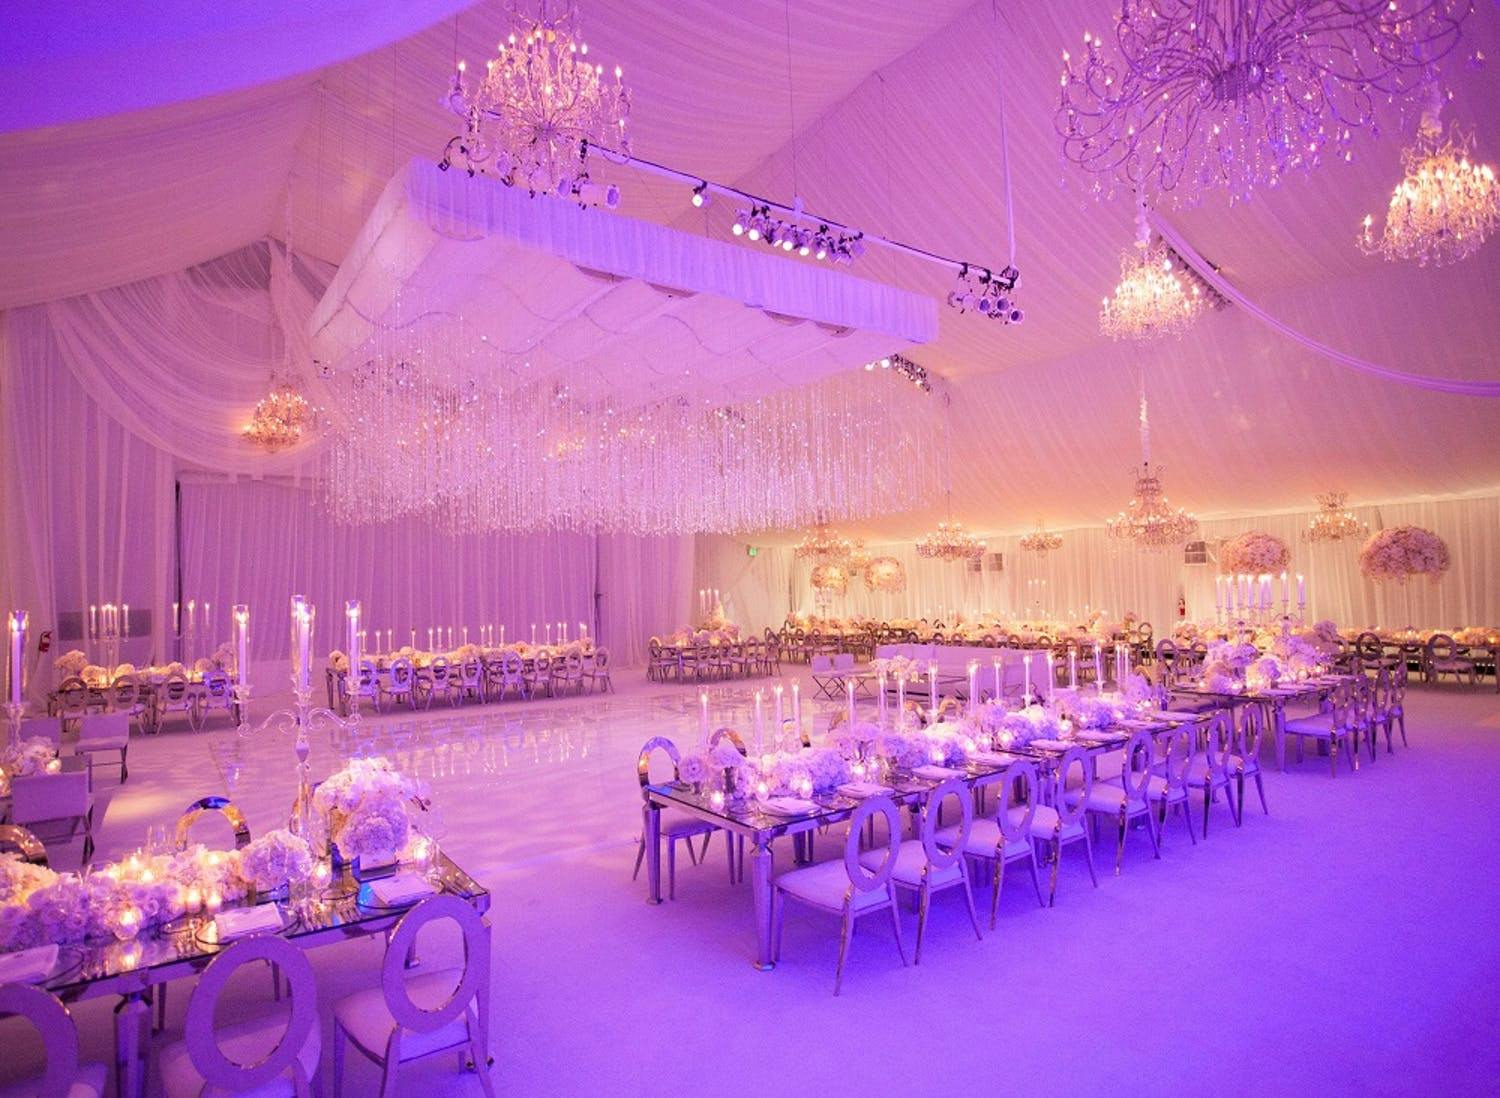 Tented Wedding with Suspended Crystal Ceiling Décor, Pink and Purple Uplighting, Polished Dance Floor, and Long Reception Tables | PartySlate